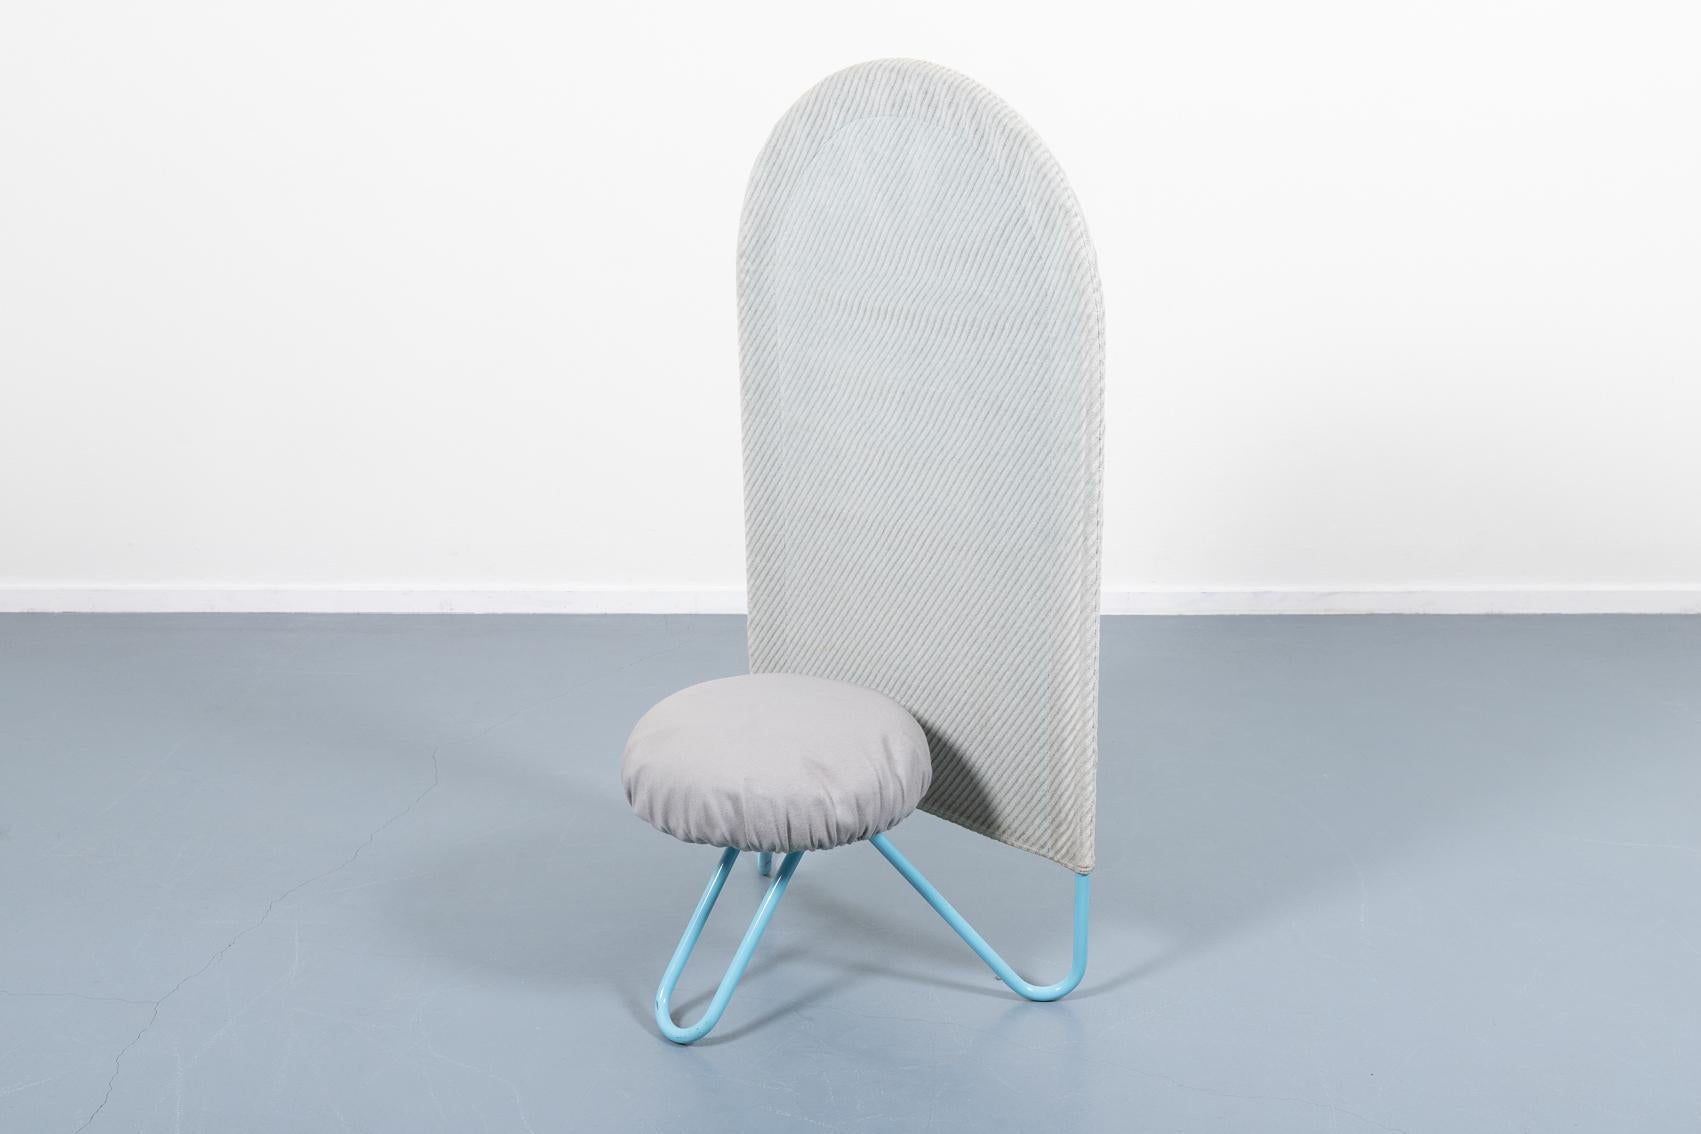 Very rare high back chair produced by Bonaldo in 1980’s. It features light blue coated tubular steel frame with removable fabric cover dressed on the backrest. It also has a removable grey fabric seat cover.

Condition
Good, age related wear and